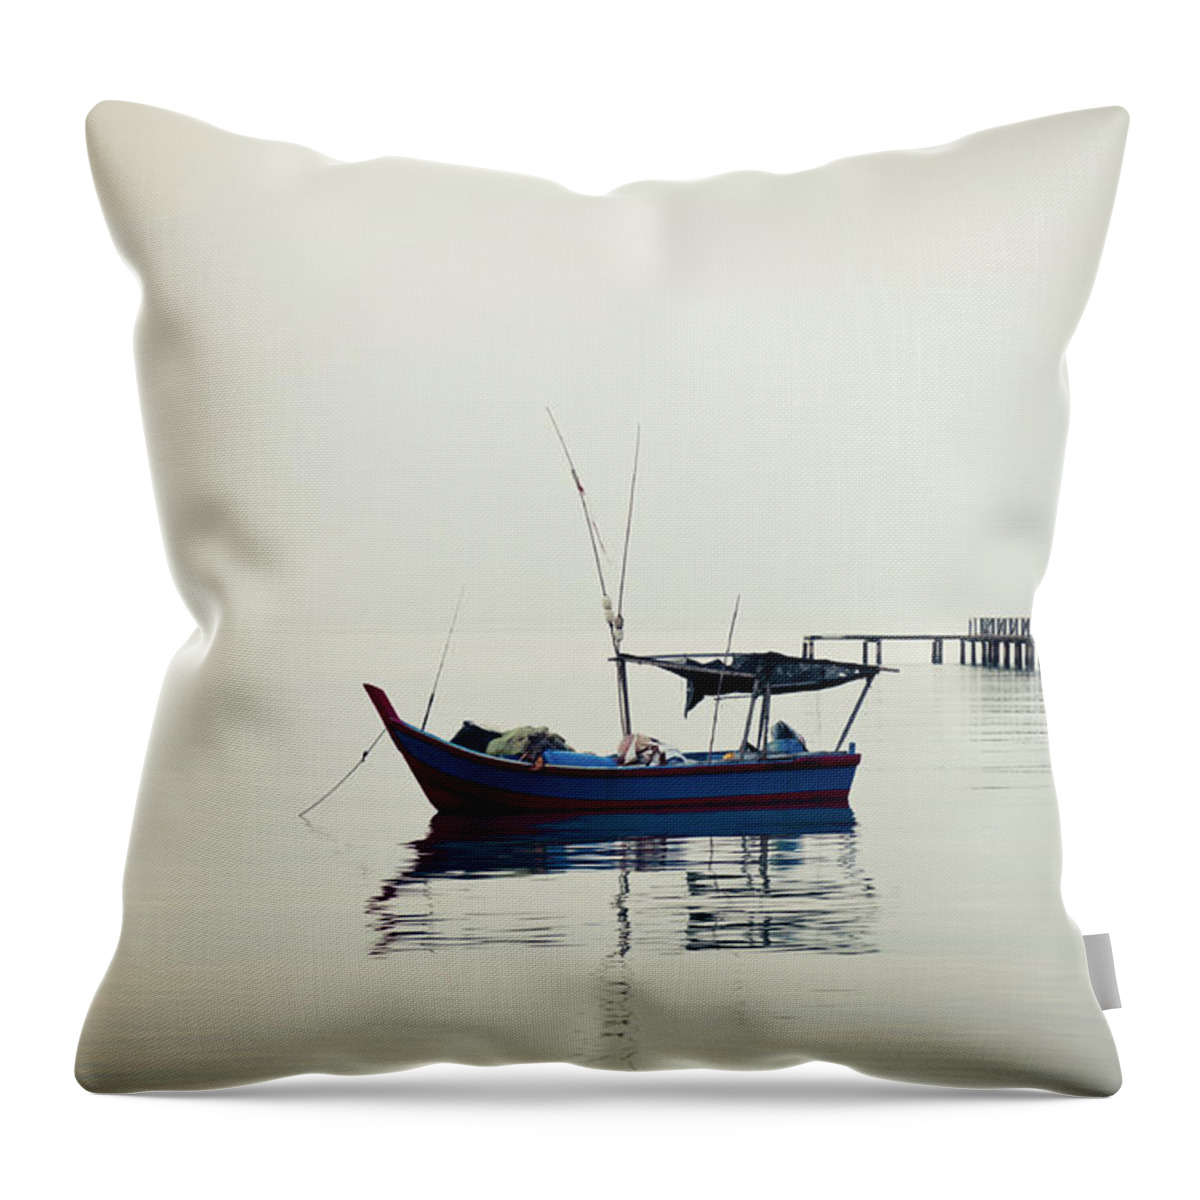 Tranquility Throw Pillow featuring the photograph A Lonely Boat by Ivan Hor